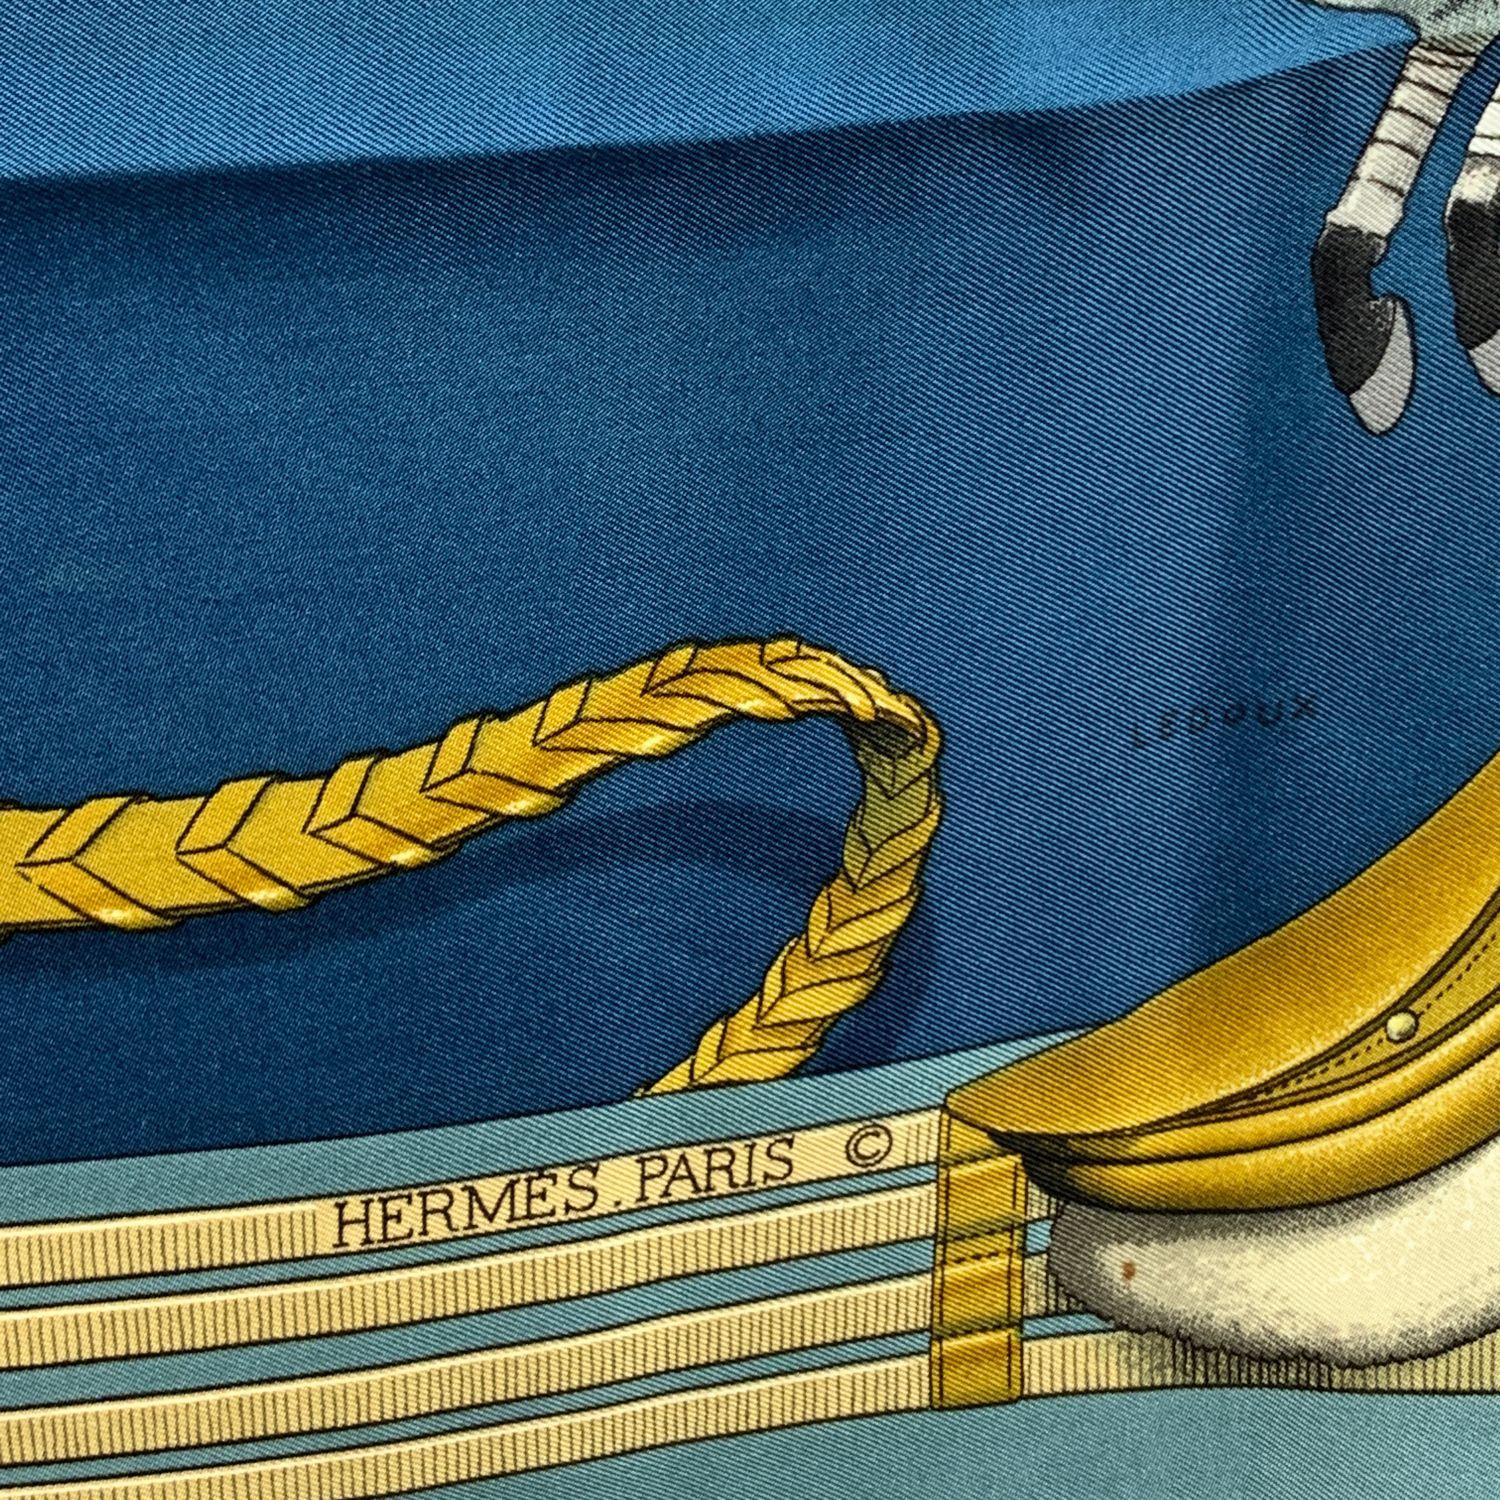 Gray Hermes Vintage Blue Silk Scarf Jumping 1971 Philippe Ledoux